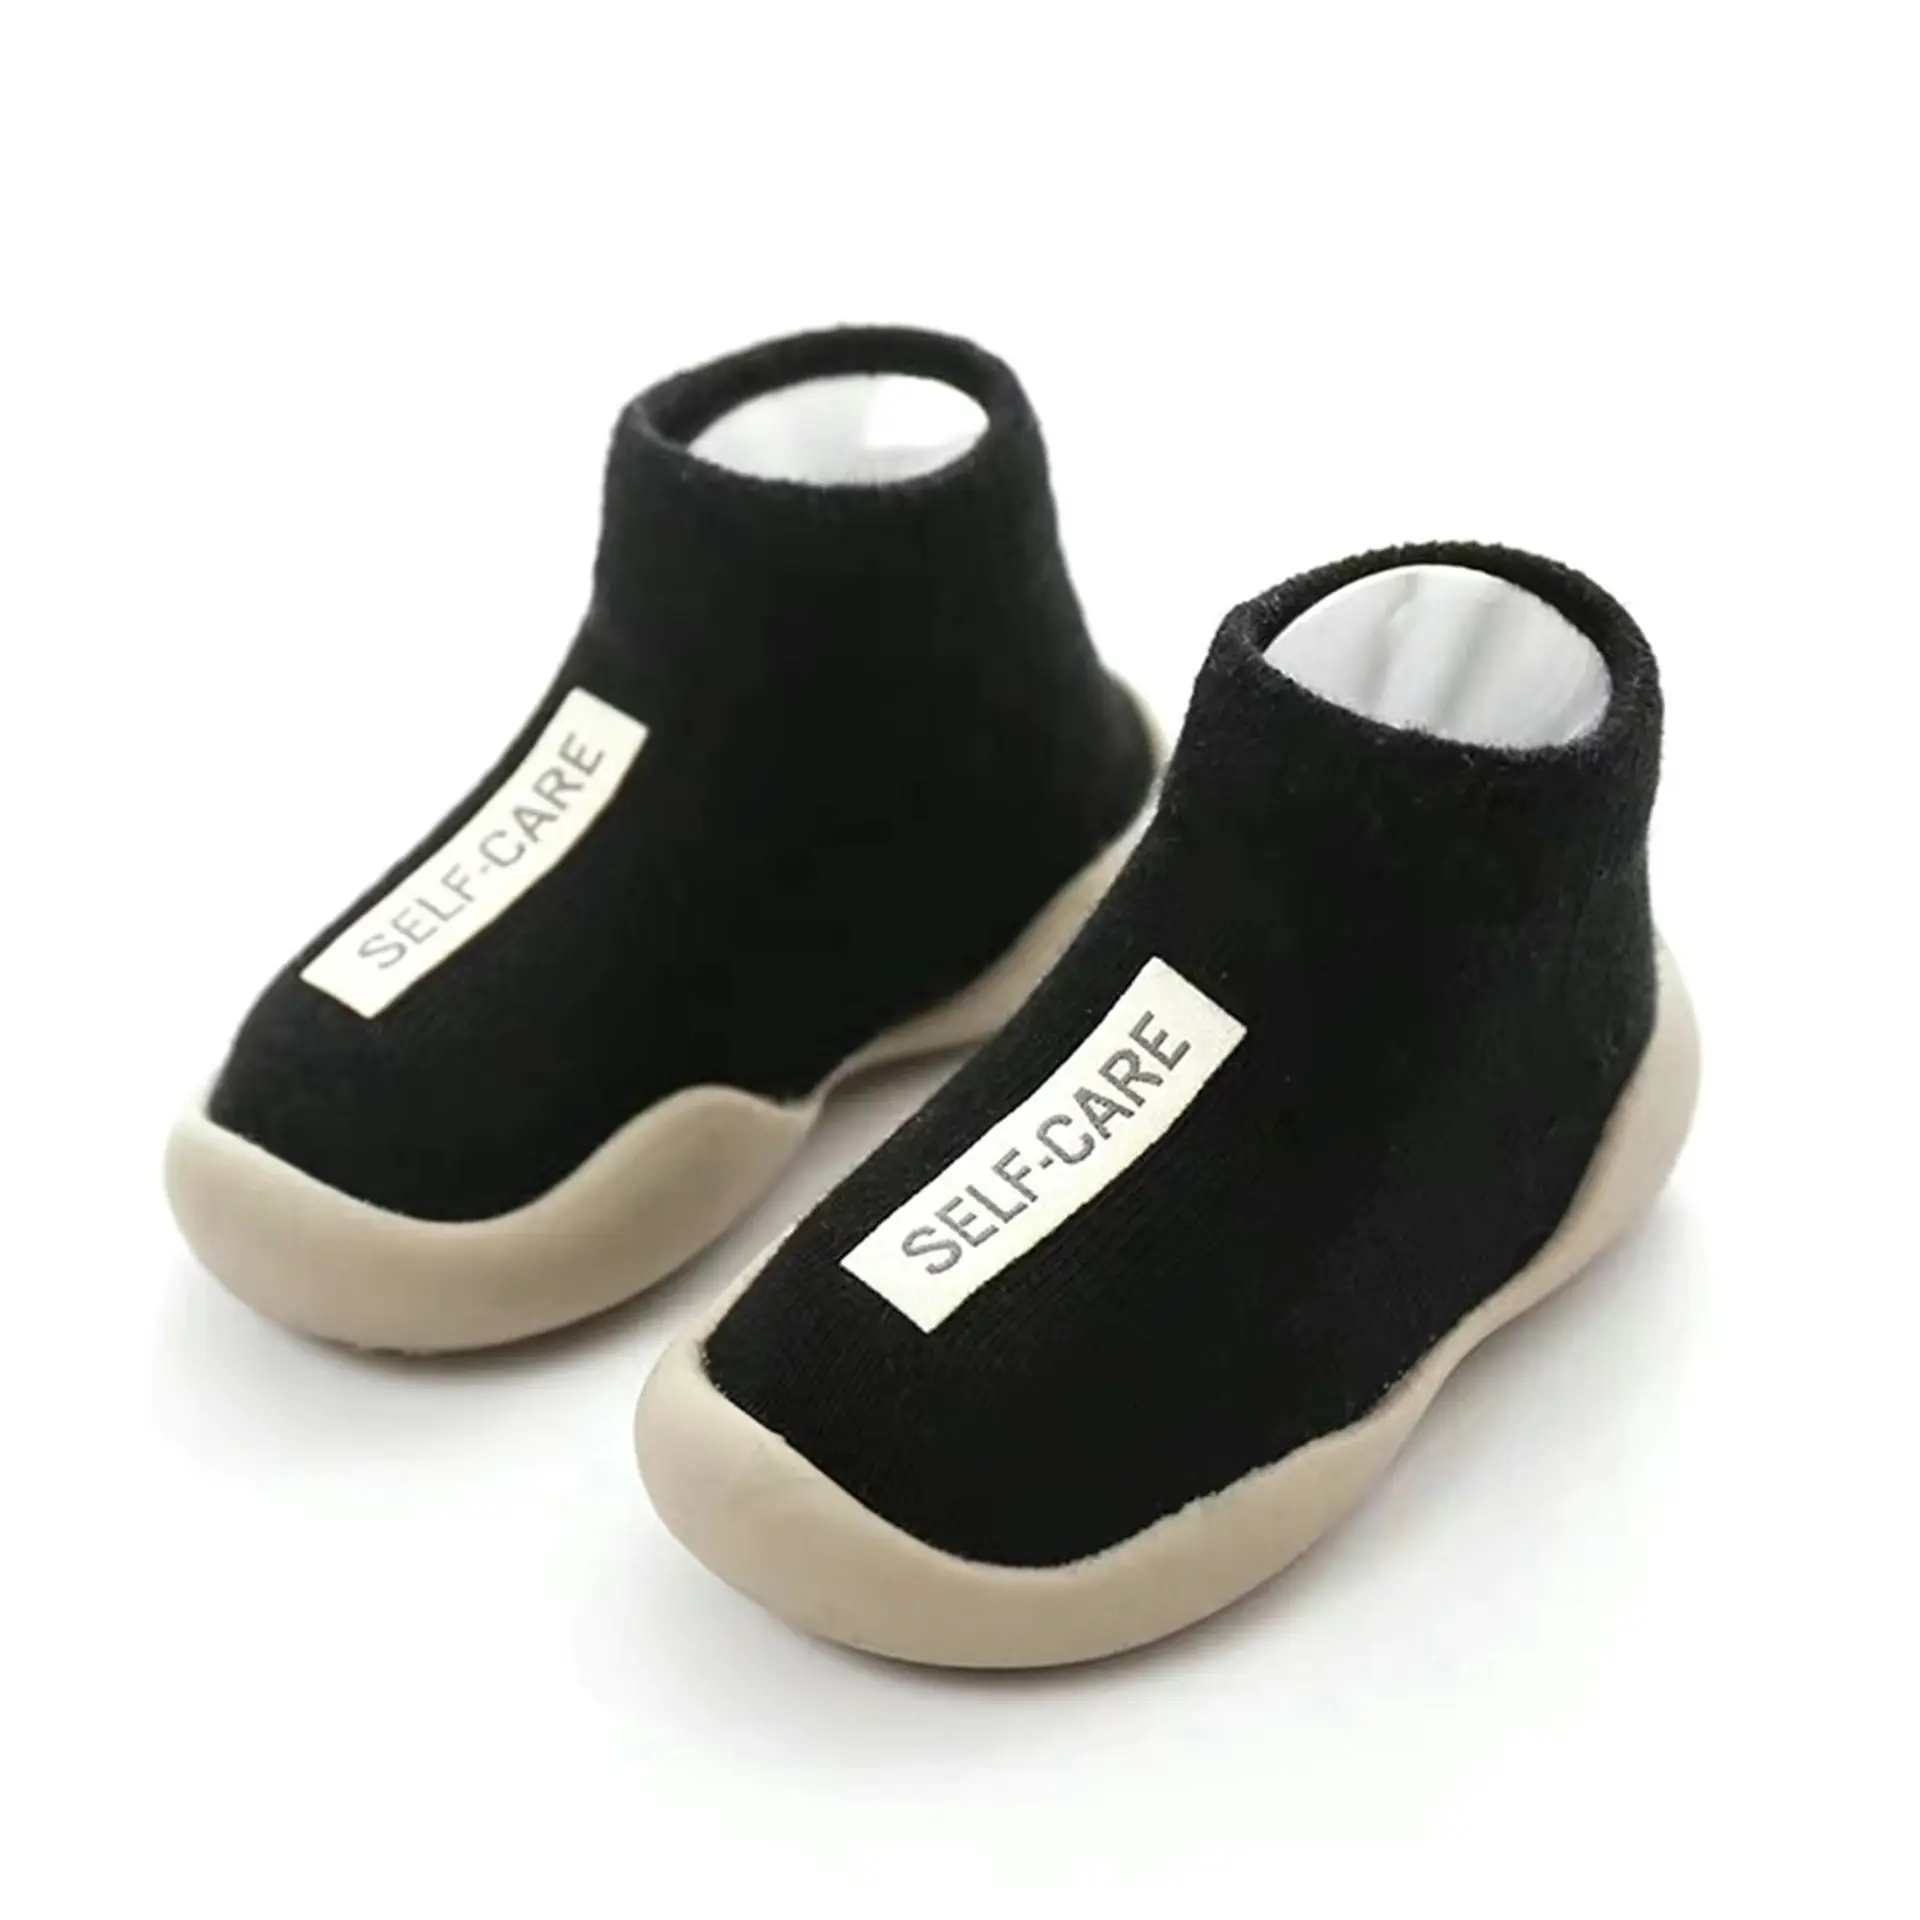 2023 New baby shoe socks with rubber sole baby antiskid walk rubber sole shoes socks rubber sole baby child shoes socks W8242